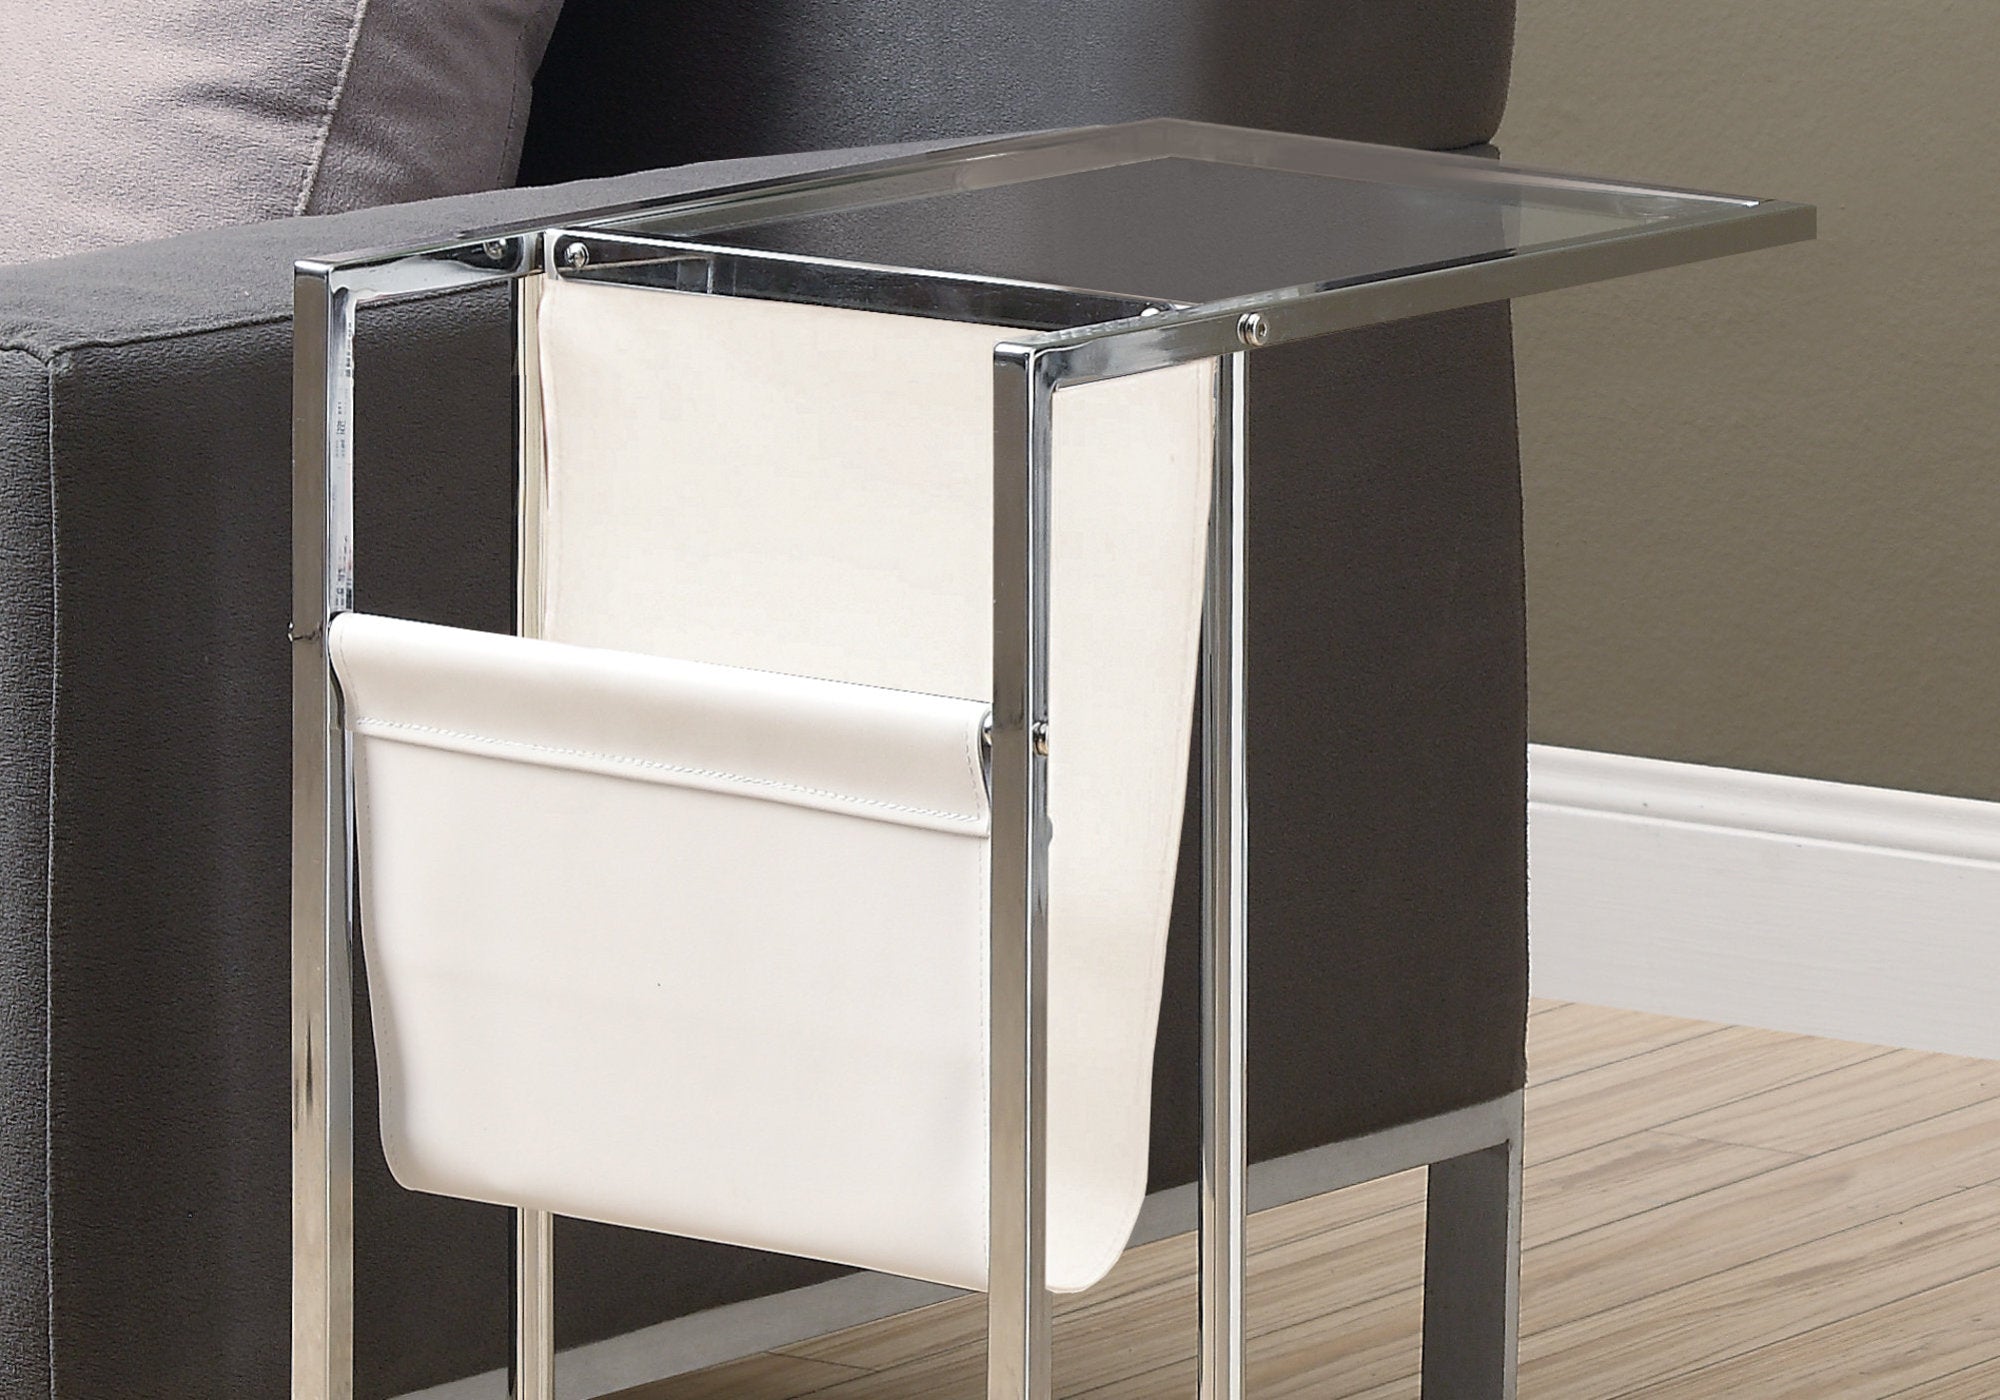 Accent Table - White / Chrome Metal With A Magazine Rack